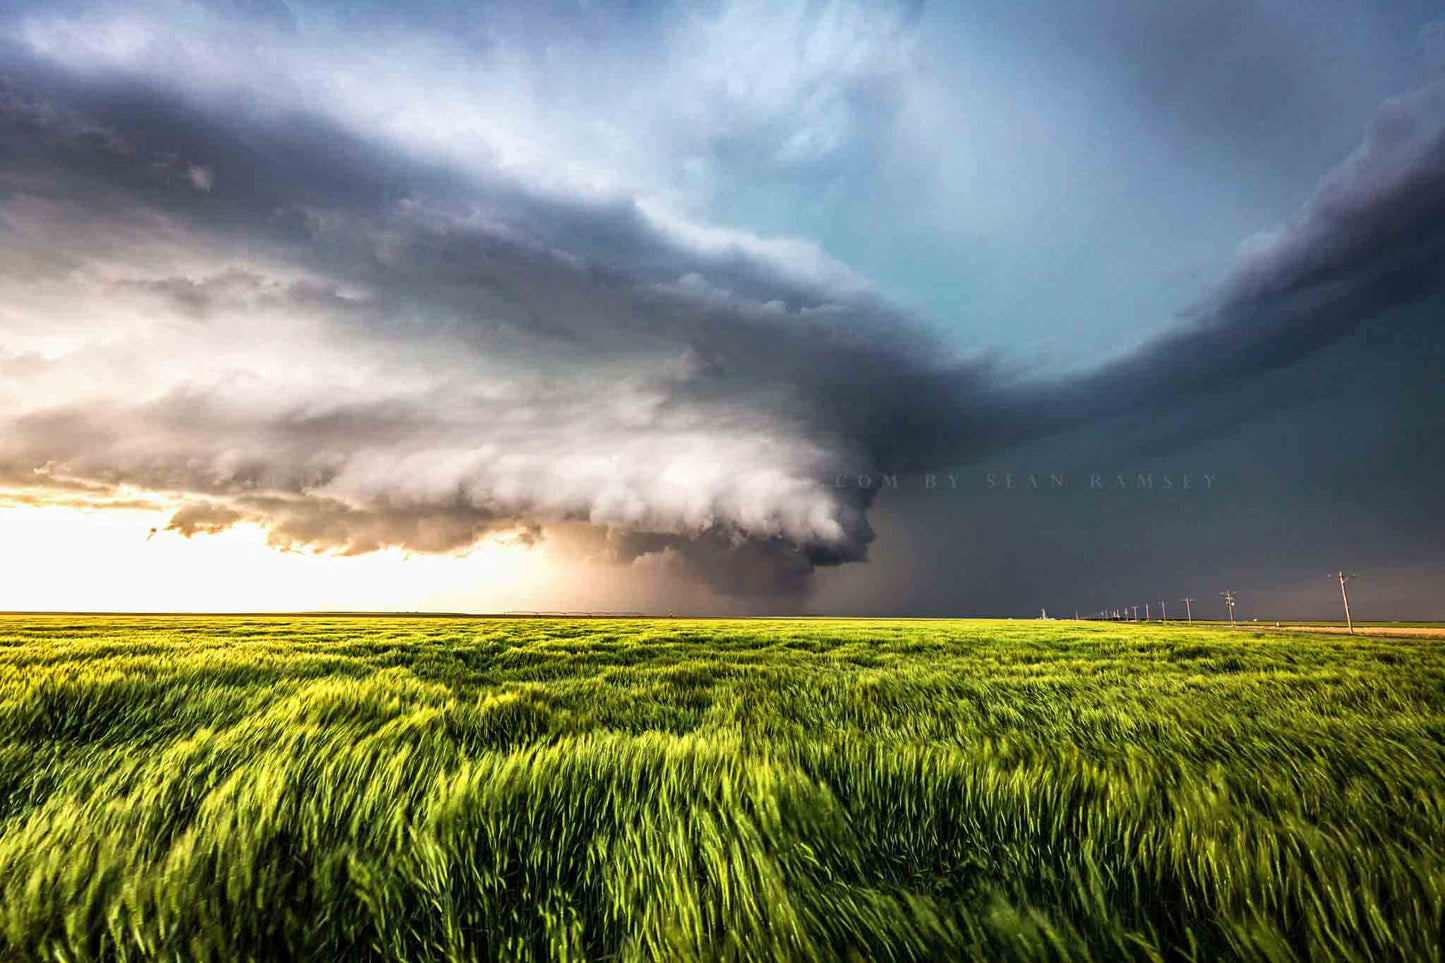 Storm photography print of a powerful supercell thunderstorm advancing over waving wheat on a stormy spring day in Kansas by Sean Ramsey of Southern Plains Photography.